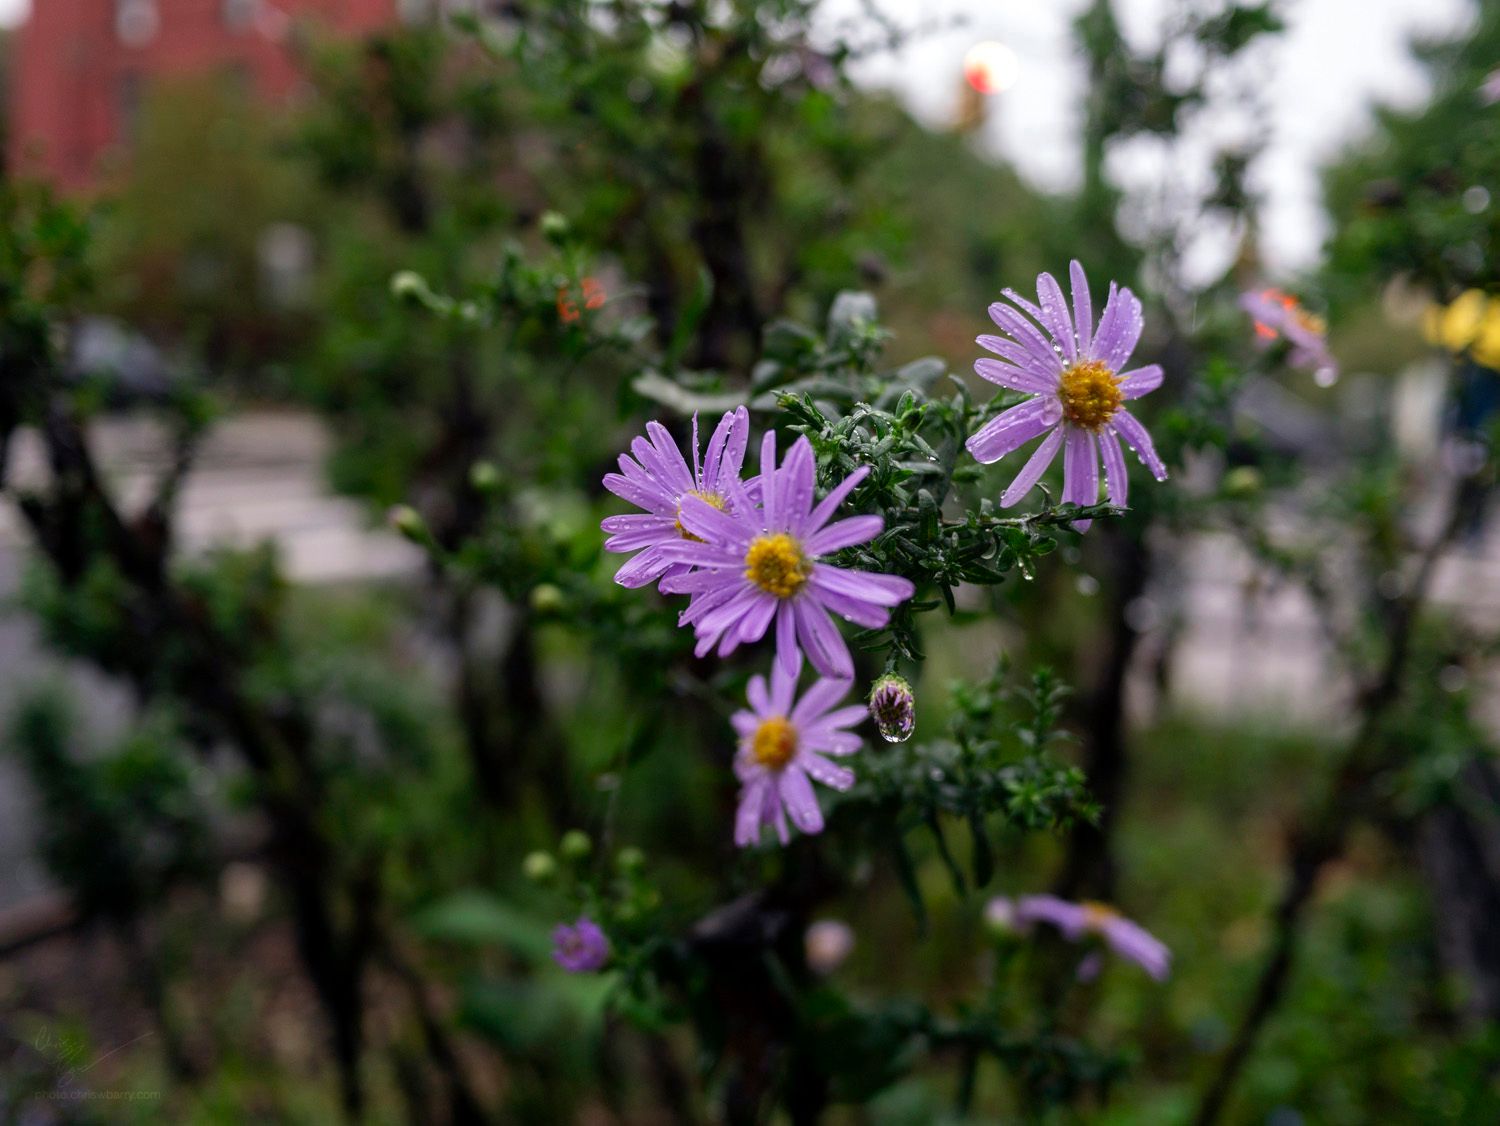 Purple aster flowers, with the rest of the image out of focus. They are covered in small raindrops